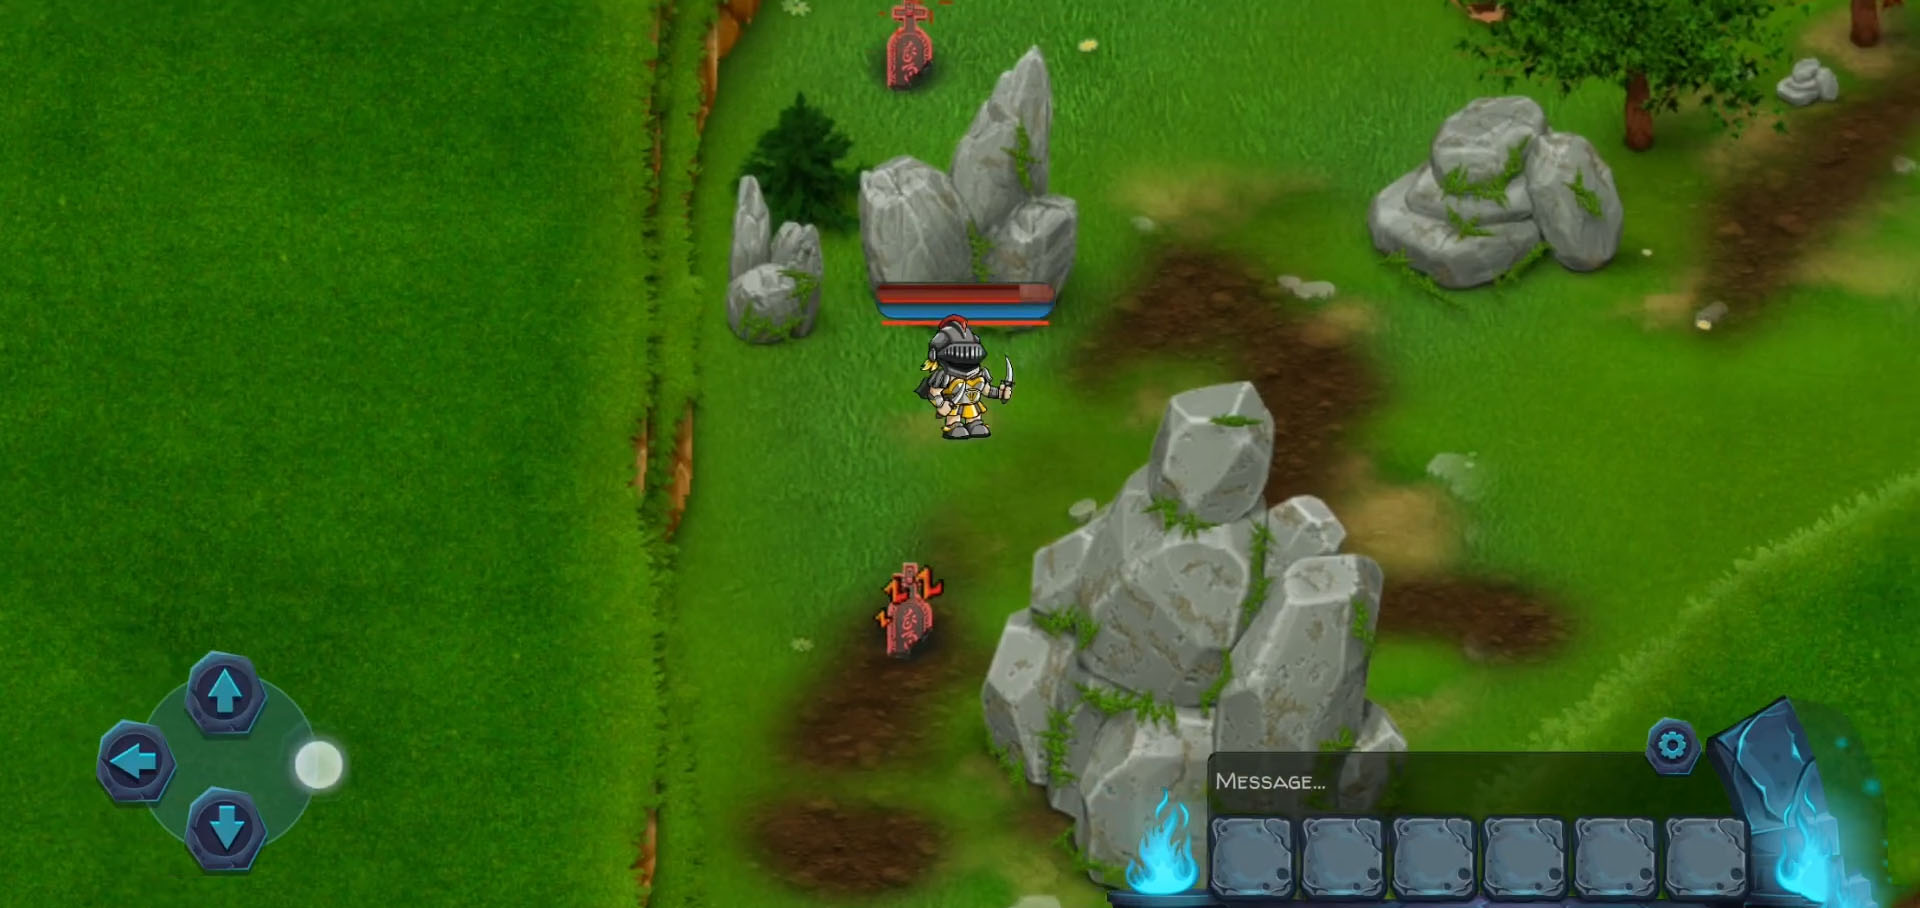 Morroc & Bean: Clicker MMO RPG for Android